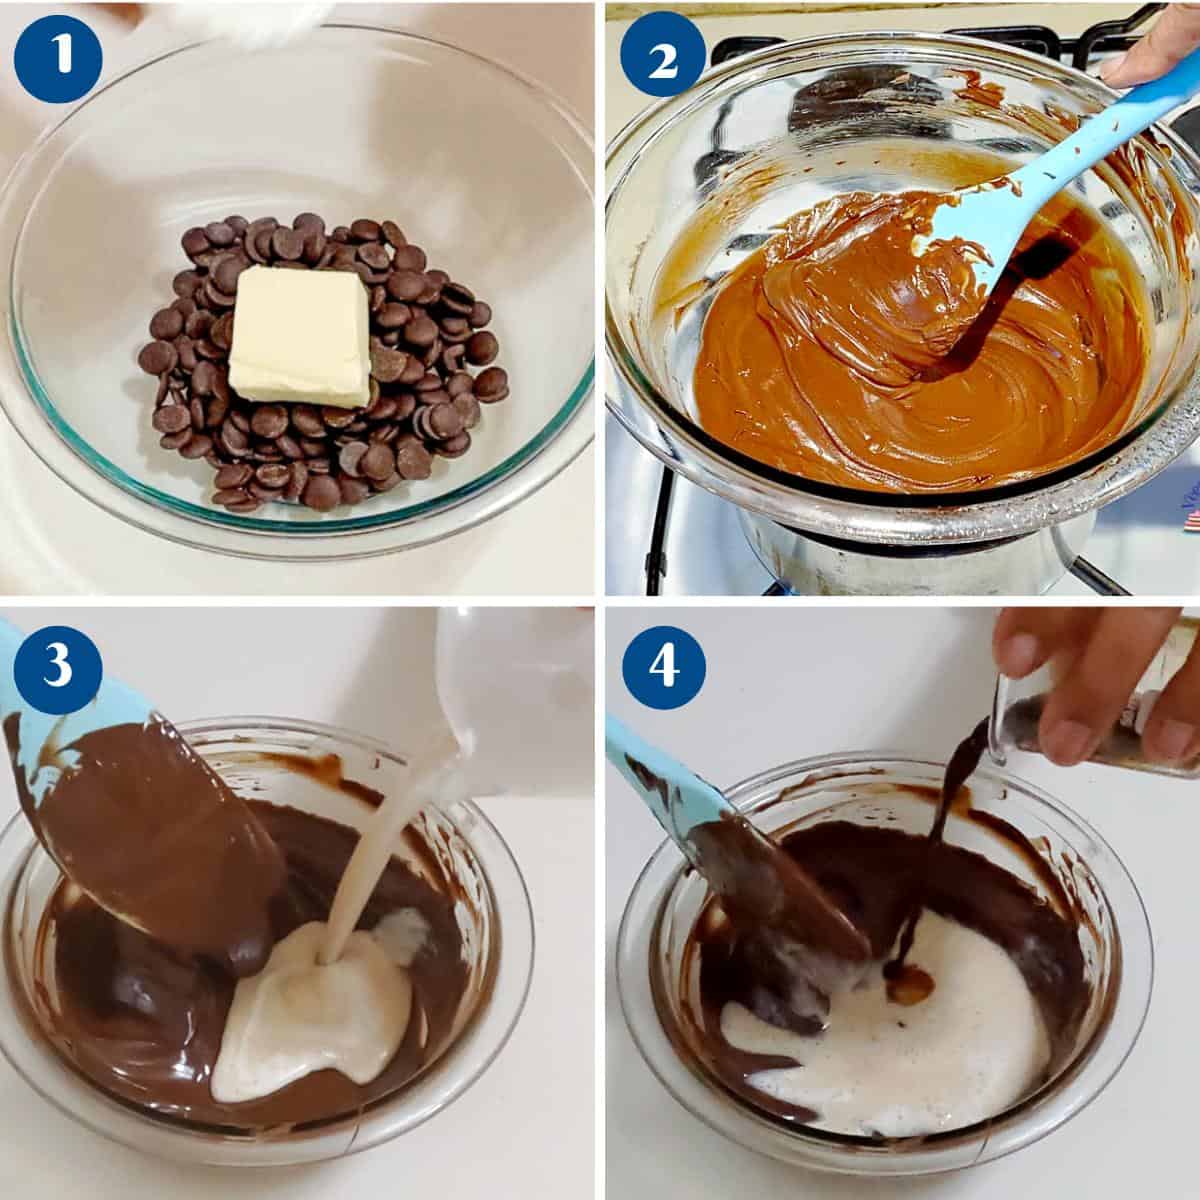 Progress pictures melt chocolate for mousse.